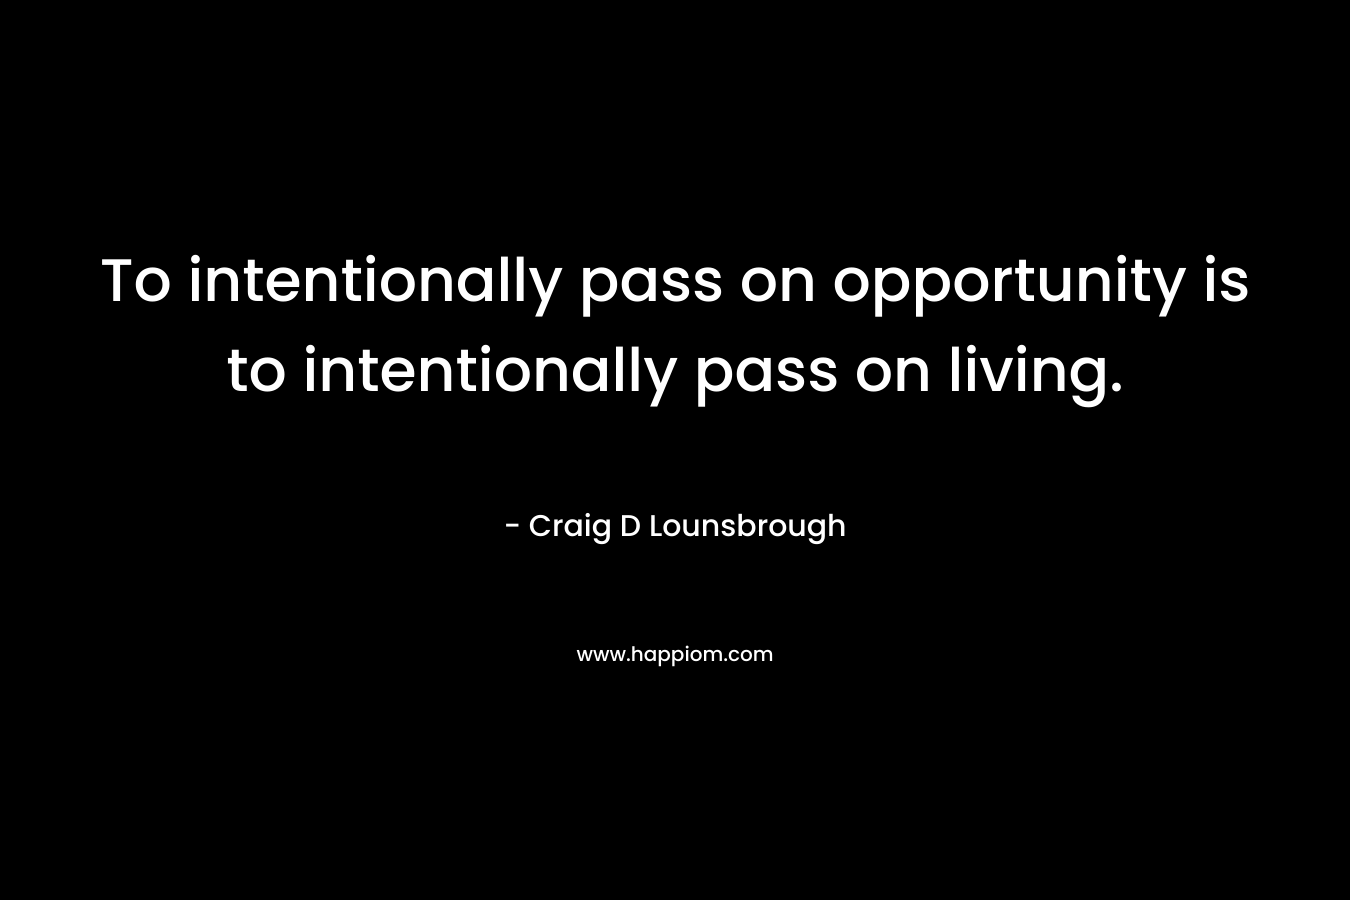 To intentionally pass on opportunity is to intentionally pass on living.